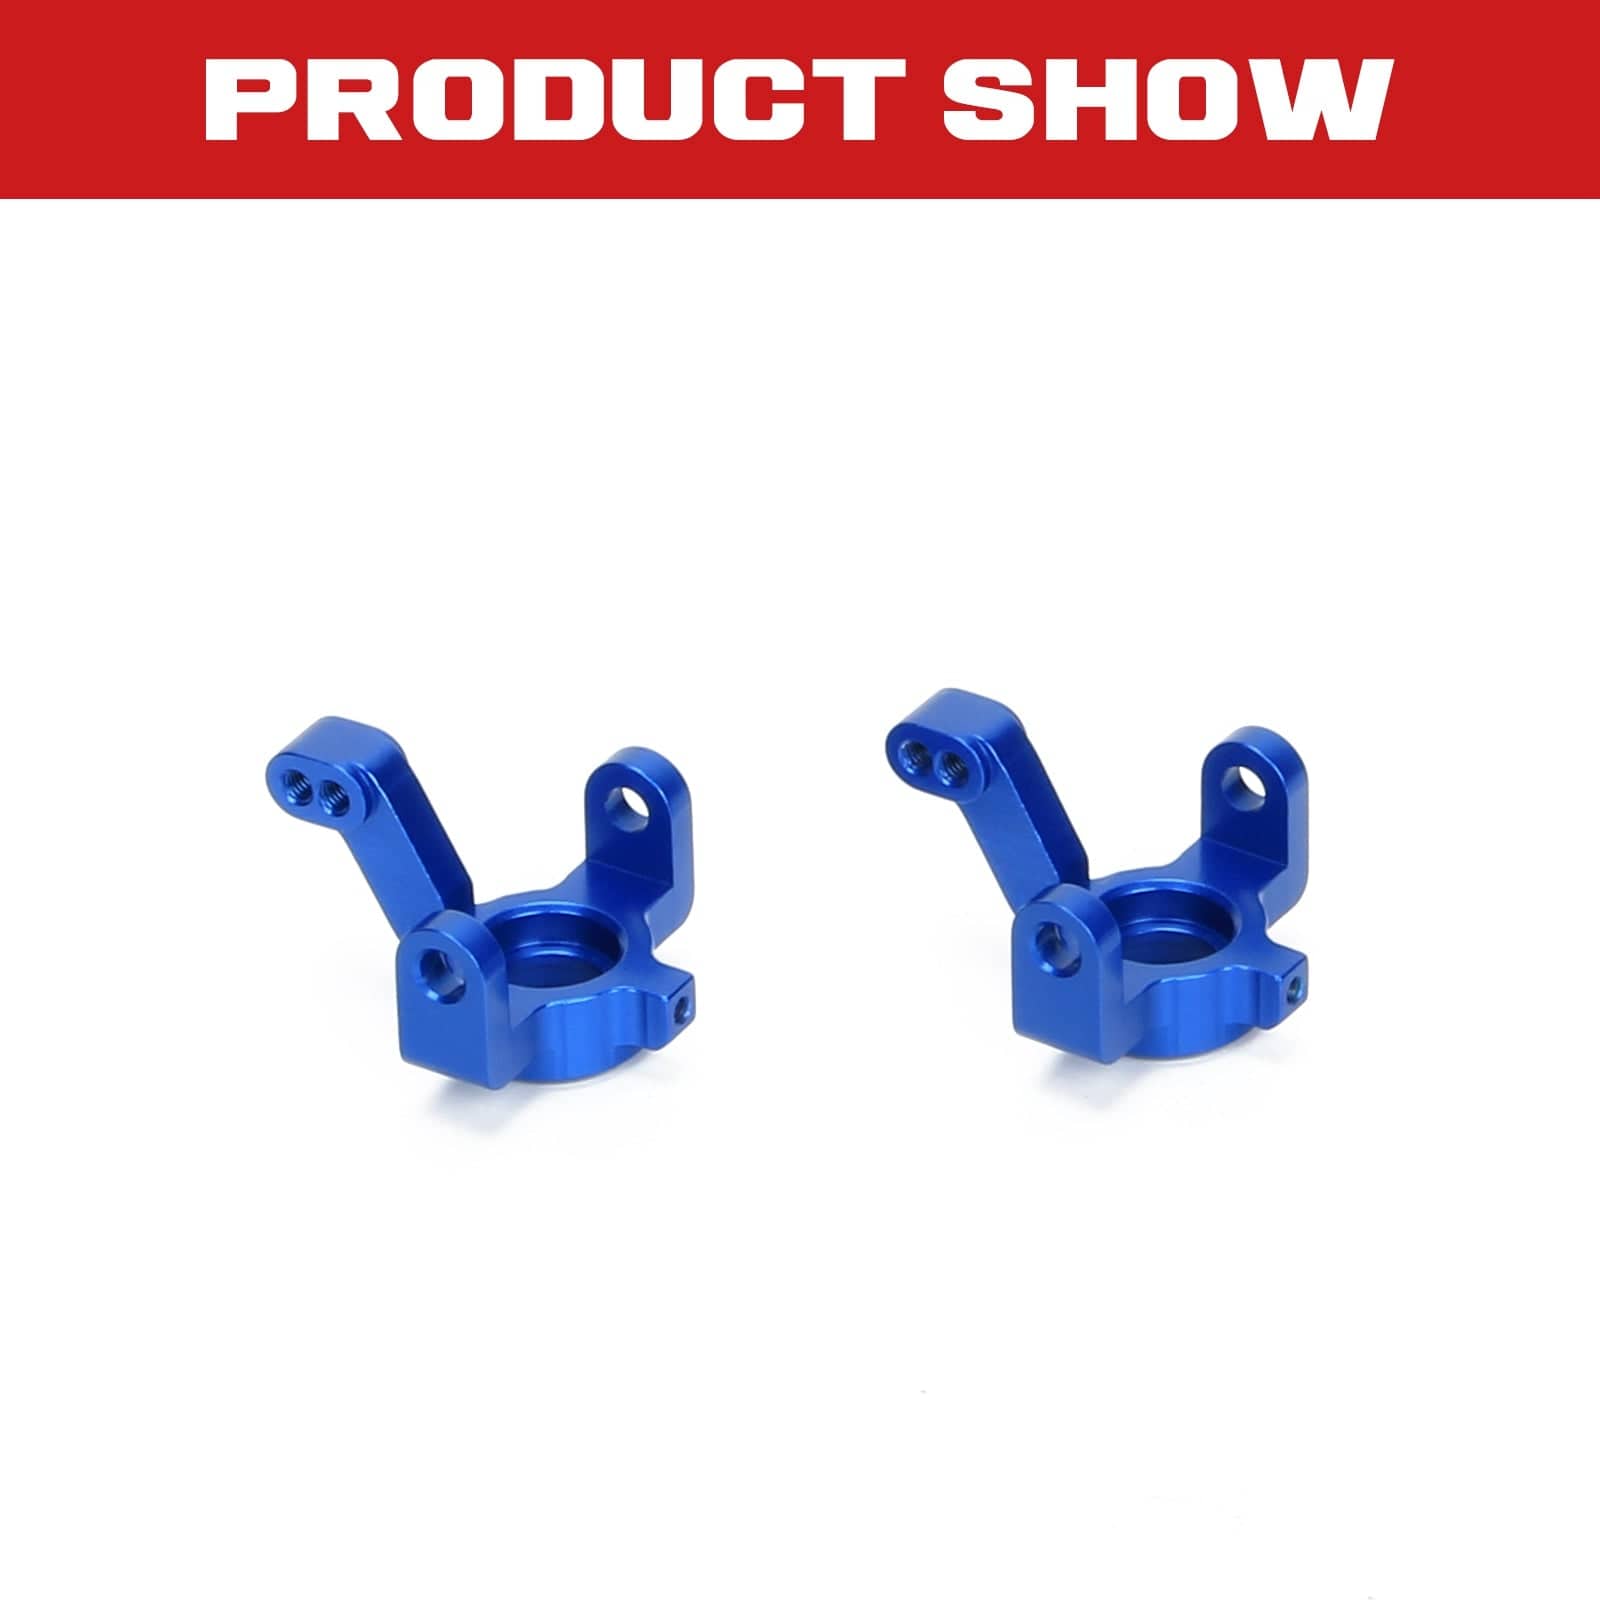 RCAWD TRAXXAS SLASH RCAWD RC Aluminum Caster Blocks Steering Blocks for 1/18 Traxxas Upgrade Parts